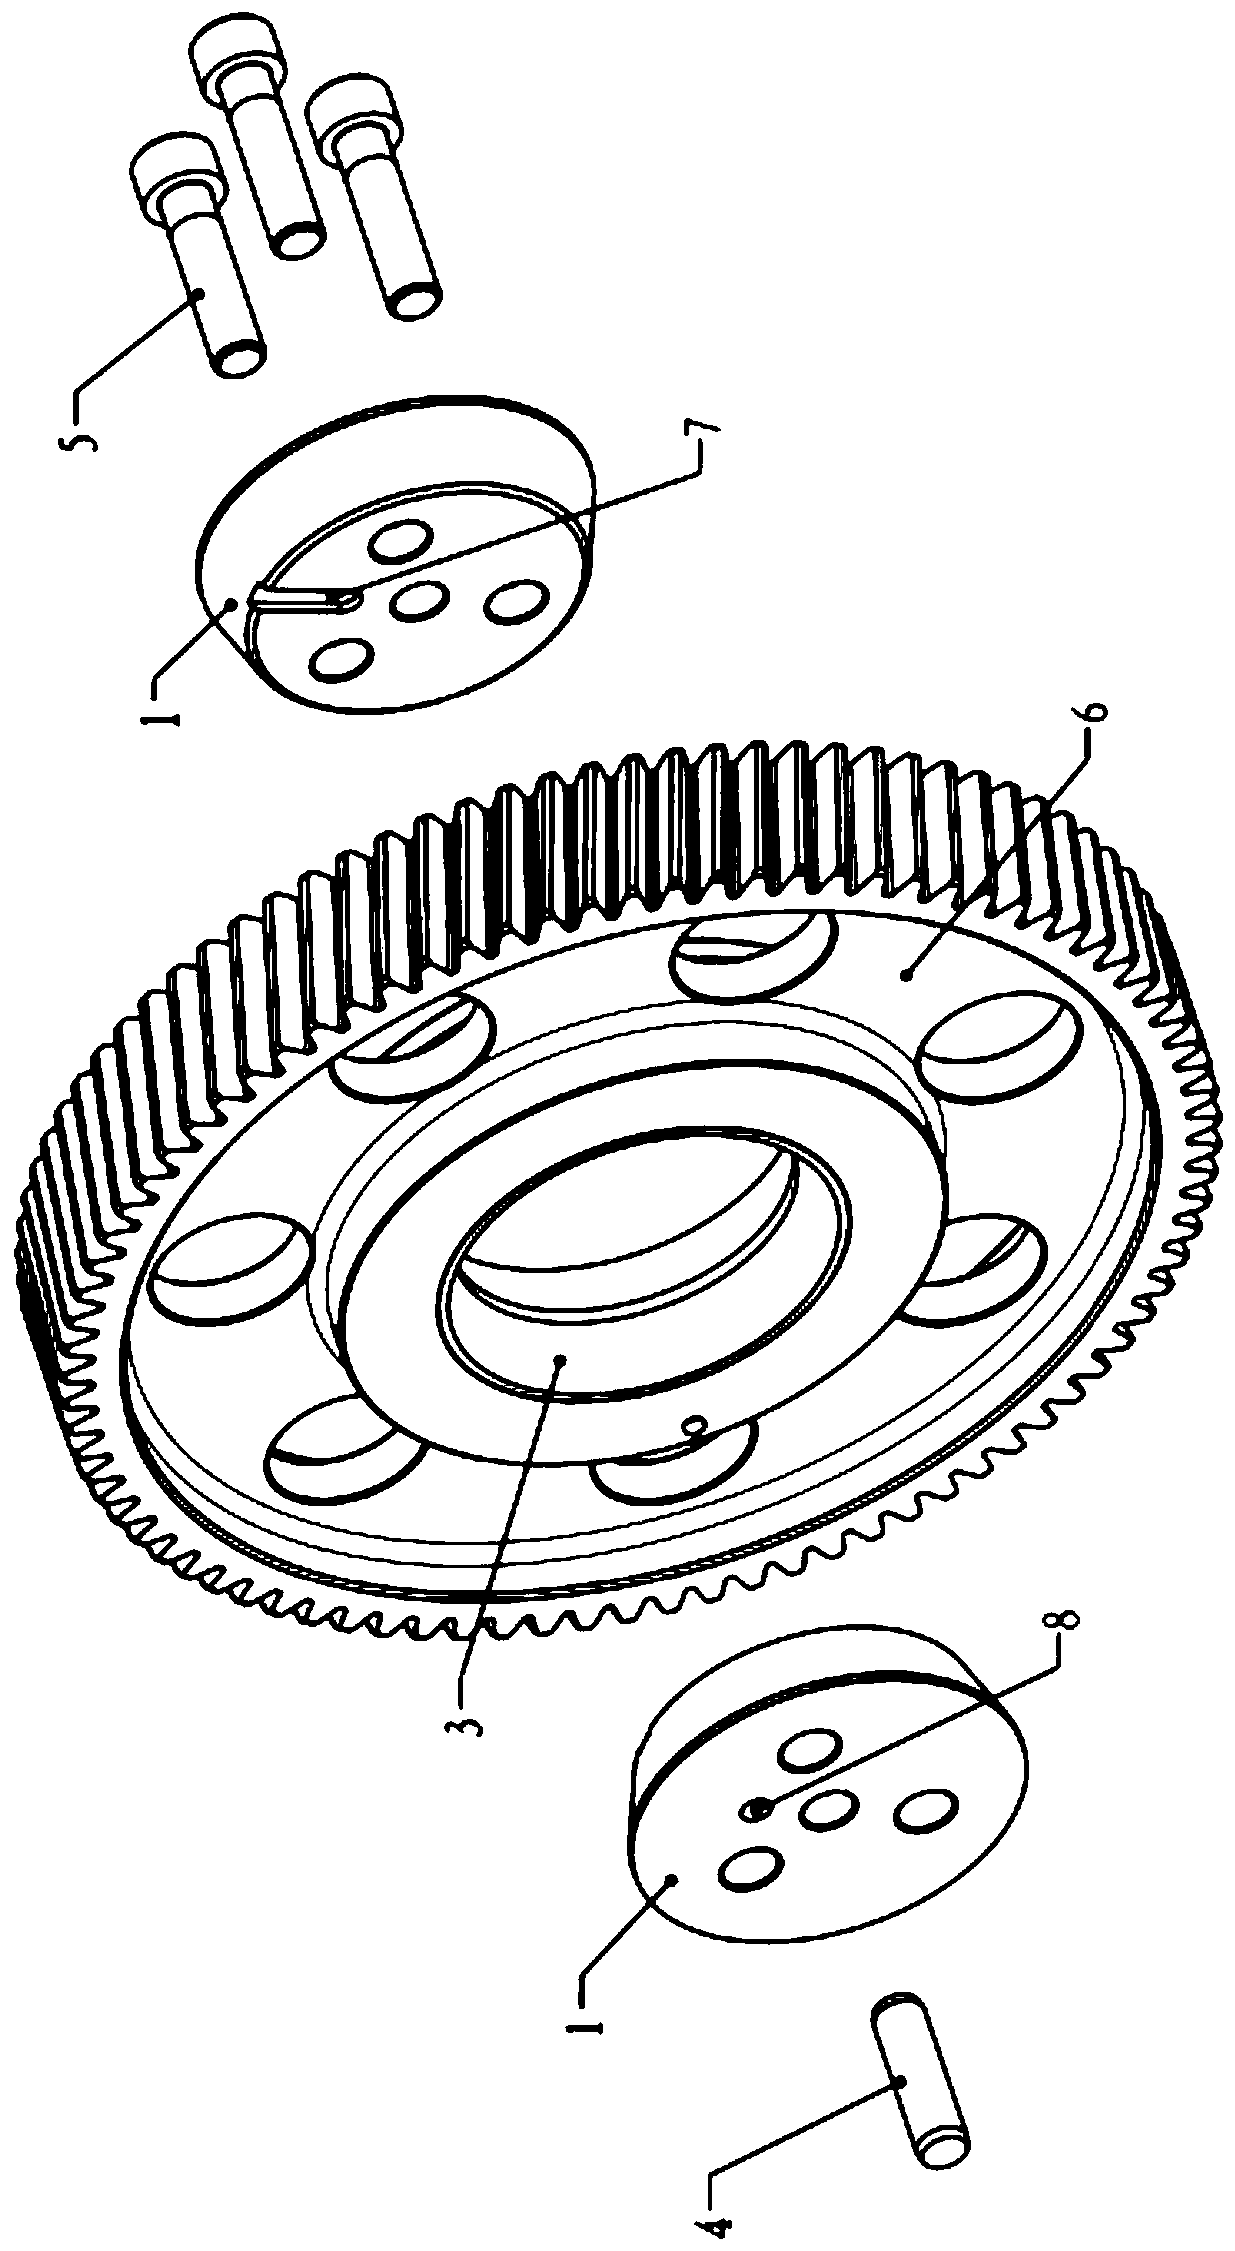 Idle gear device and engine